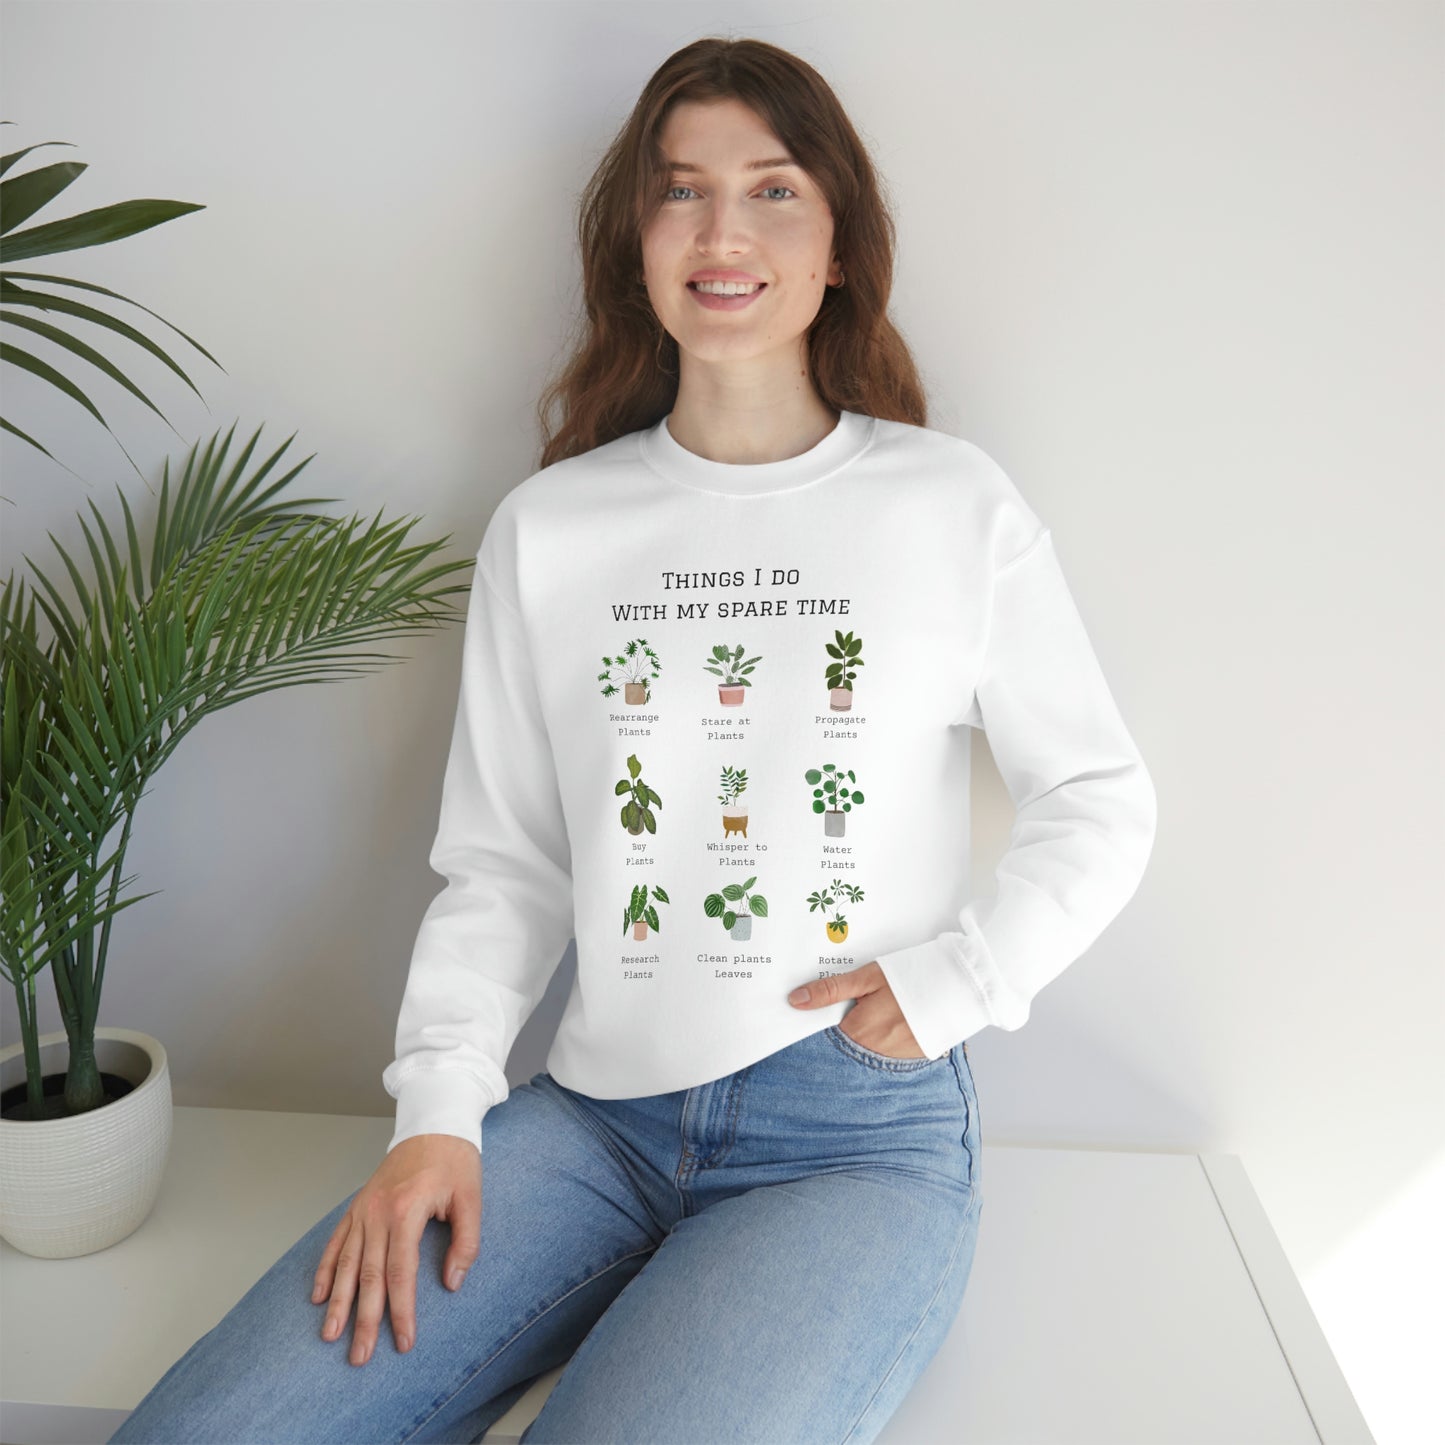 Things I do with my spare time swaetshirt. Funny plant swaetshirt. Plant sweater. Christmas gift for plant mama. Plant dad or plant lady.